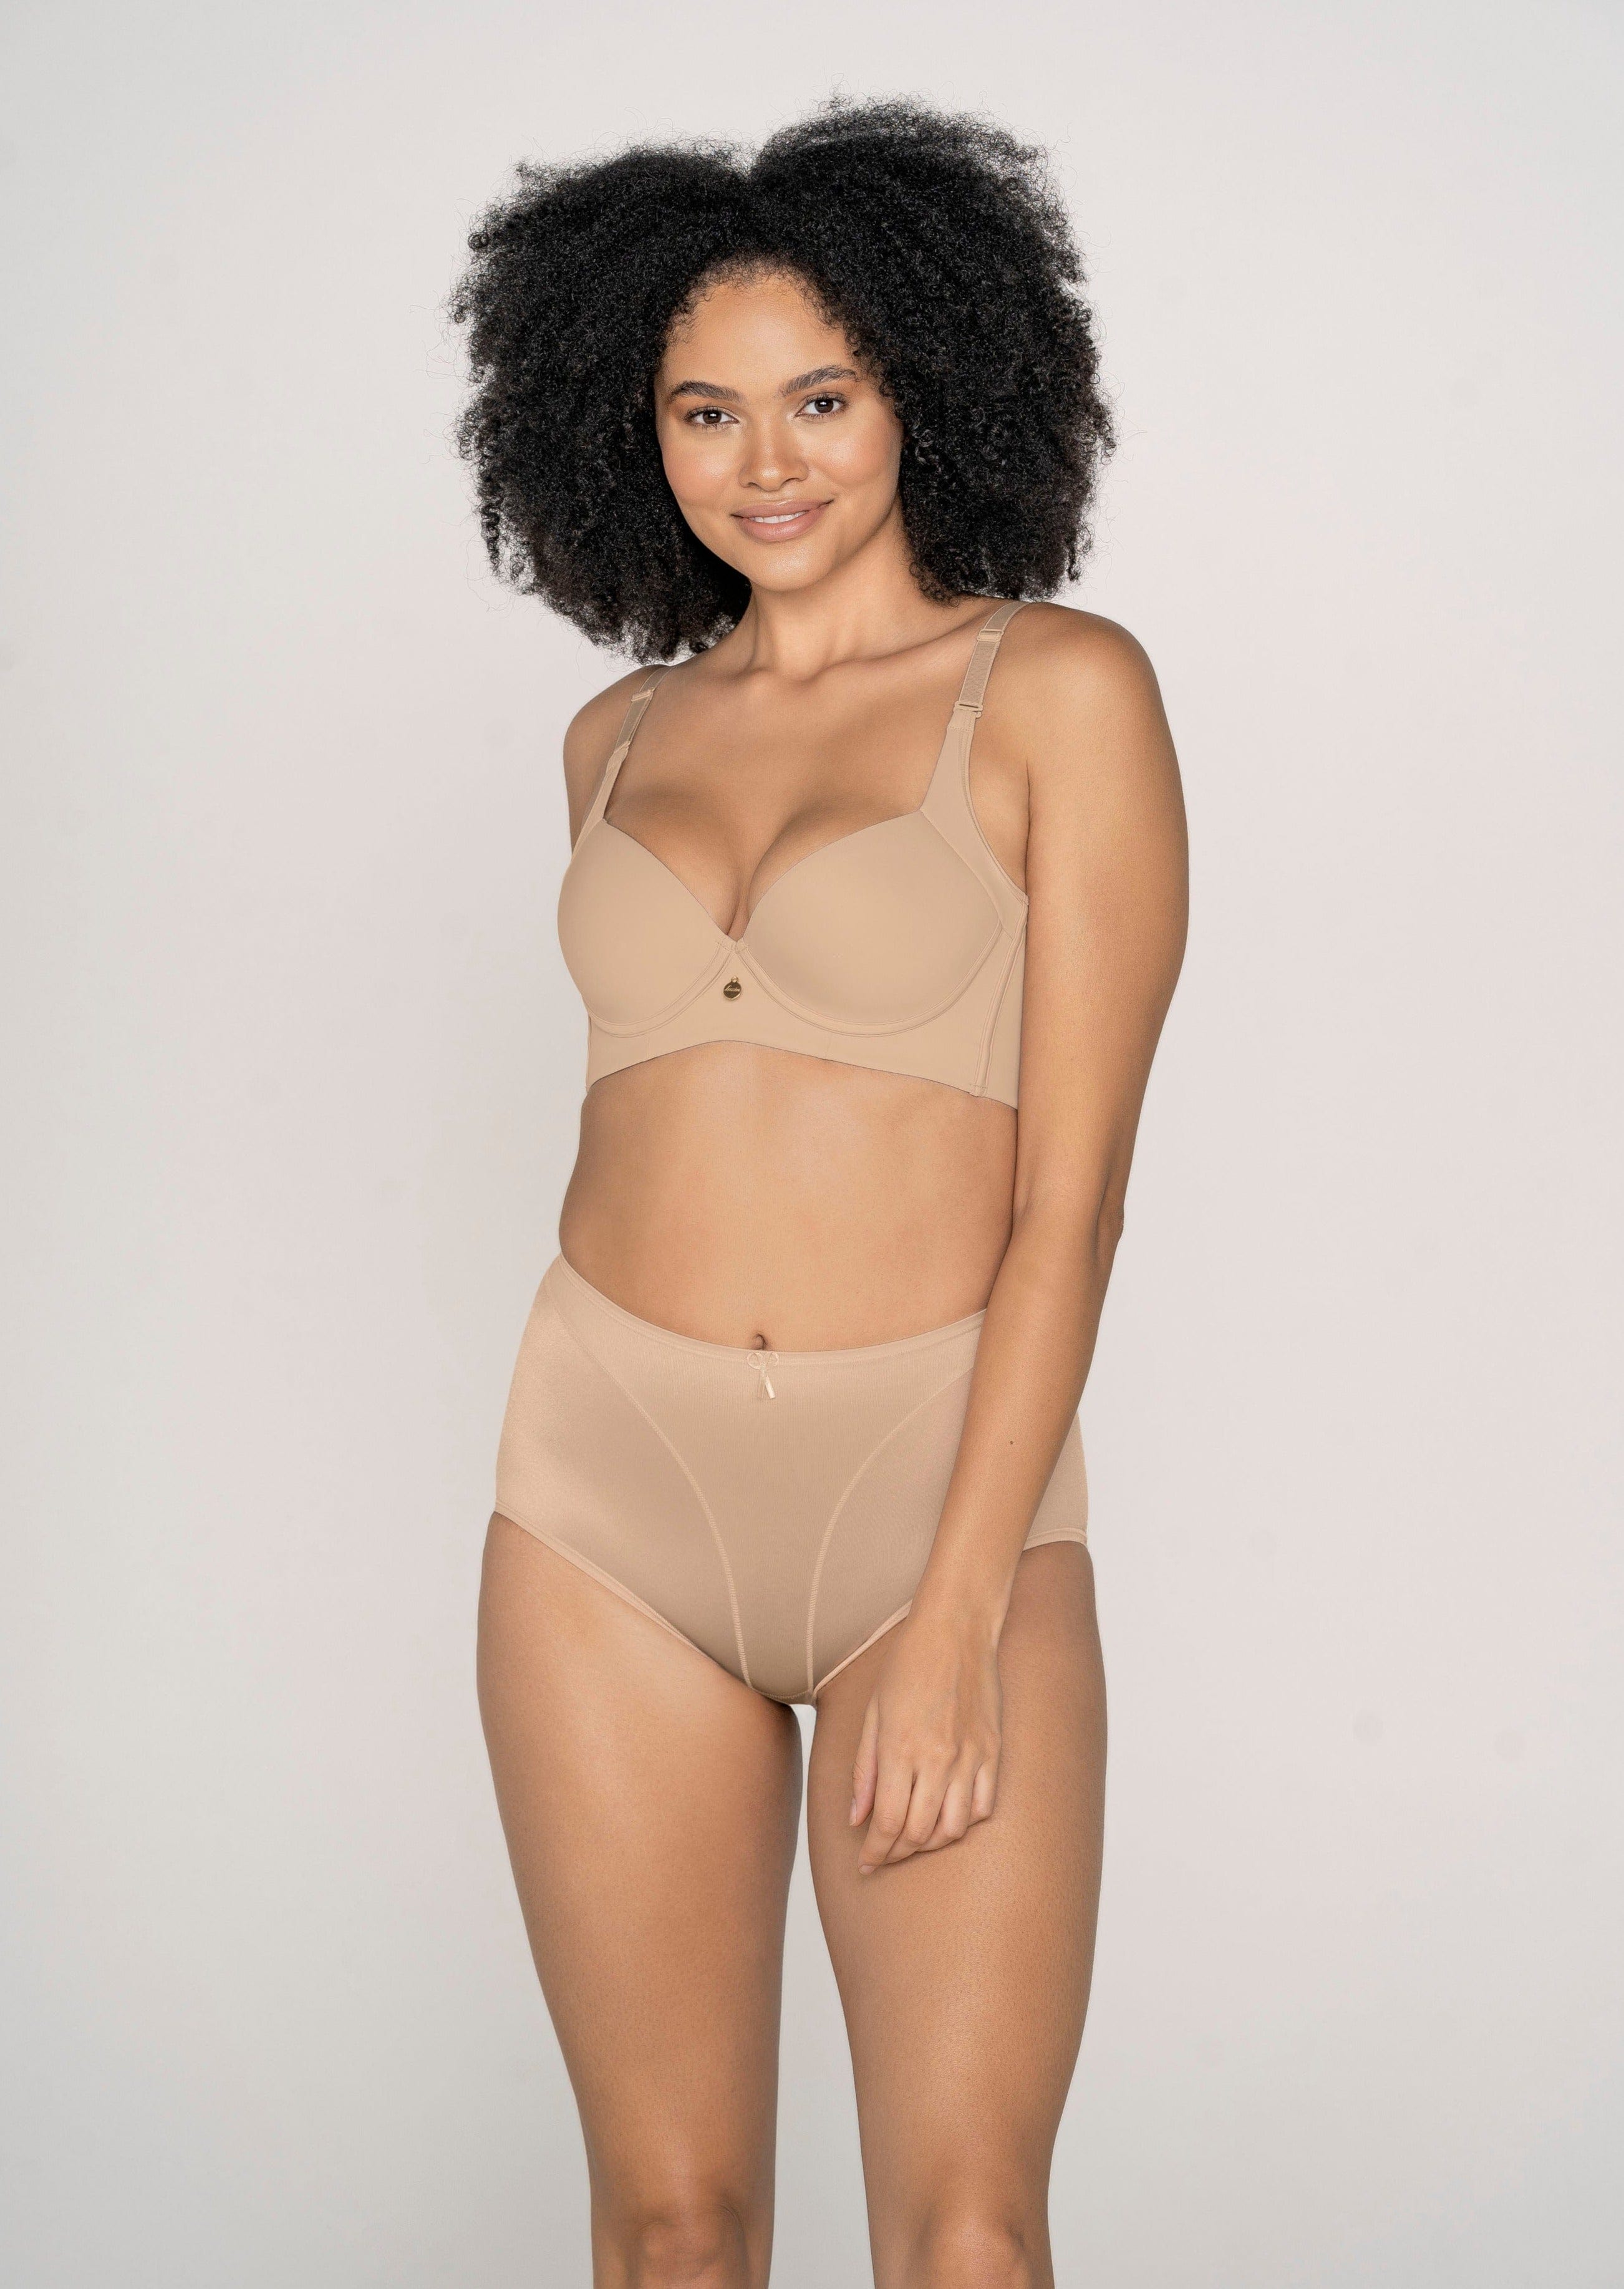 Back Smoothing Bra with Soft Full Coverage Cups - High Profile - HauteFlair